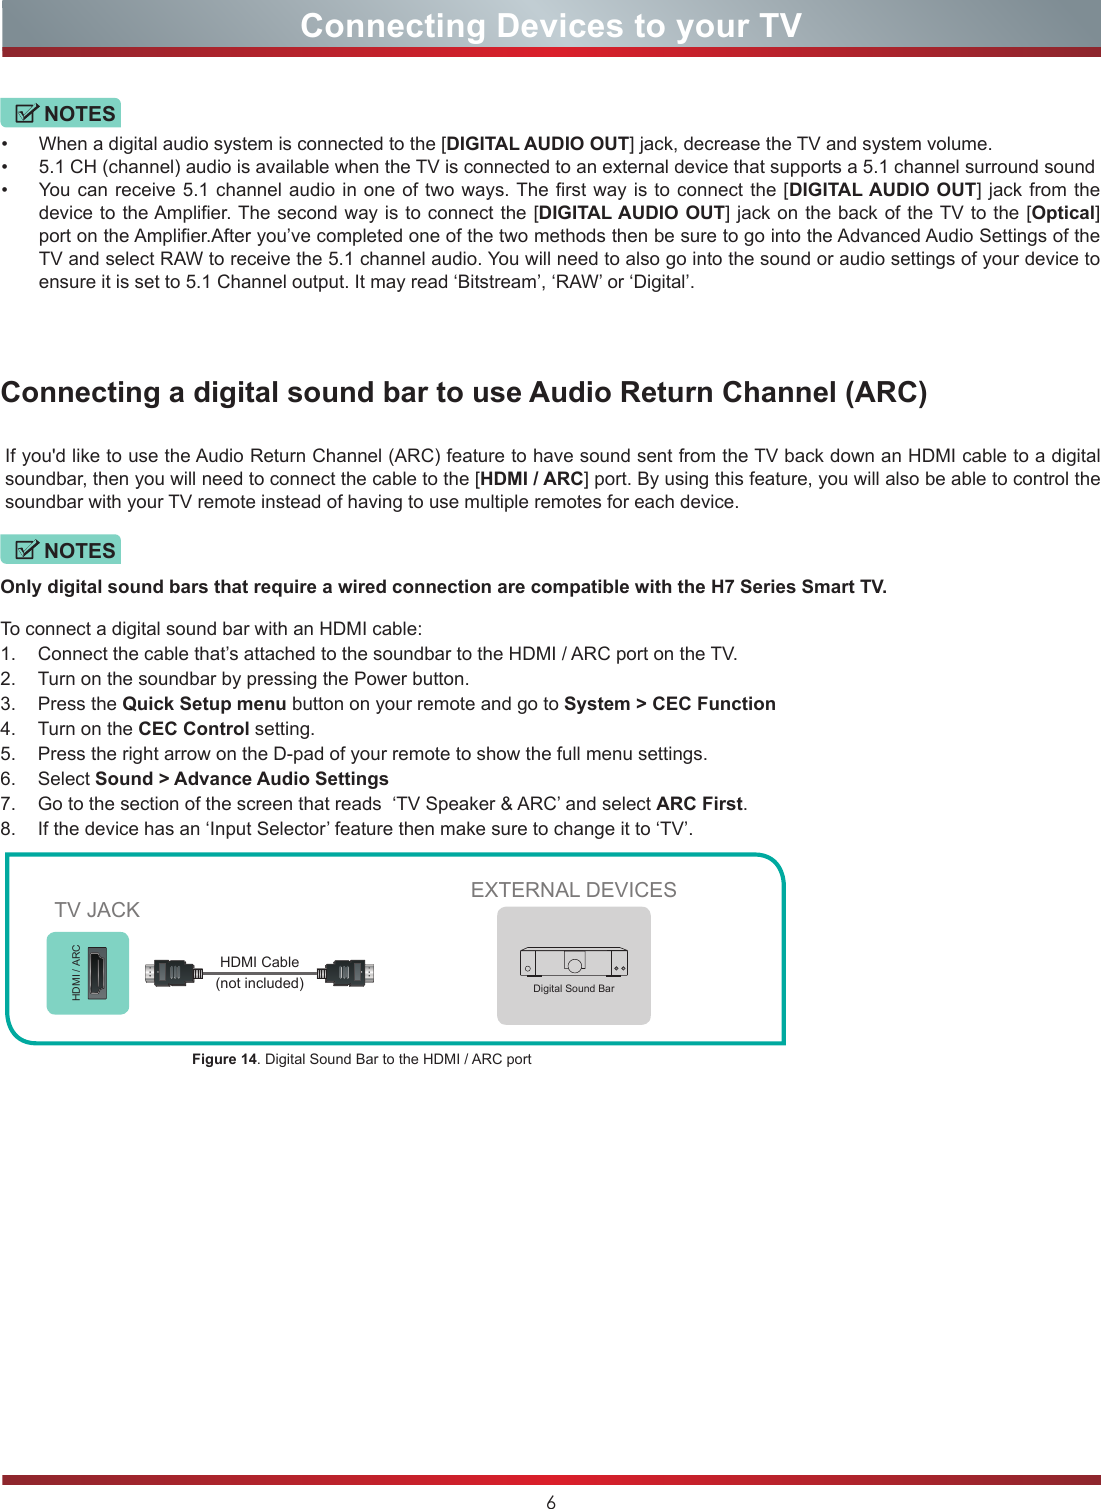 6Connecting Devices to your TVConnecting a digital sound bar to use Audio Return Channel (ARC)If you&apos;d like to use the Audio Return Channel (ARC) feature to have sound sent from the TV back down an HDMI cable to a digital soundbar, then you will need to connect the cable to the [HDMI / ARC] port. By using this feature, you will also be able to control the soundbar with your TV remote instead of having to use multiple remotes for each device. •  When a digital audio system is connected to the [DIGITAL AUDIO OUT] jack, decrease the TV and system volume. •  5.1 CH (channel) audio is available when the TV is connected to an external device that supports a 5.1 channel surround sound •  You can receive 5.1 channel audio in one of two ways. The first way is to connect the [DIGITAL AUDIO OUT] jack from the device to the Amplifier. The second way is to connect the [DIGITAL AUDIO OUT] jack on the back of the TV to the [Optical] port on the Amplifier.After you’ve completed one of the two methods then be sure to go into the Advanced Audio Settings of the TV and select RAW to receive the 5.1 channel audio. You will need to also go into the sound or audio settings of your device to ensure it is set to 5.1 Channel output. It may read ‘Bitstream’, ‘RAW’ or ‘Digital’.Only digital sound bars that require a wired connection are compatible with the H7 Series Smart TV.To connect a digital sound bar with an HDMI cable:1.  Connect the cable that’s attached to the soundbar to the HDMI / ARC port on the TV.2.  Turn on the soundbar by pressing the Power button.3.  Press the Quick Setup menu button on your remote and go to System &gt; CEC Function4.  Turn on the CEC Control setting.5.  Press the right arrow on the D-pad of your remote to show the full menu settings.6.  Select Sound &gt; Advance Audio Settings 7.  Go to the section of the screen that reads  ‘TV Speaker &amp; ARC’ and select ARC First.8.  If the device has an ‘Input Selector’ feature then make sure to change it to ‘TV’.EXTERNAL DEVICESDigital Sound BarHDMI / ARCFigure 14. Digital Sound Bar to the HDMI / ARC port TV JACKHDMI Cable (not included)NOTESNOTES